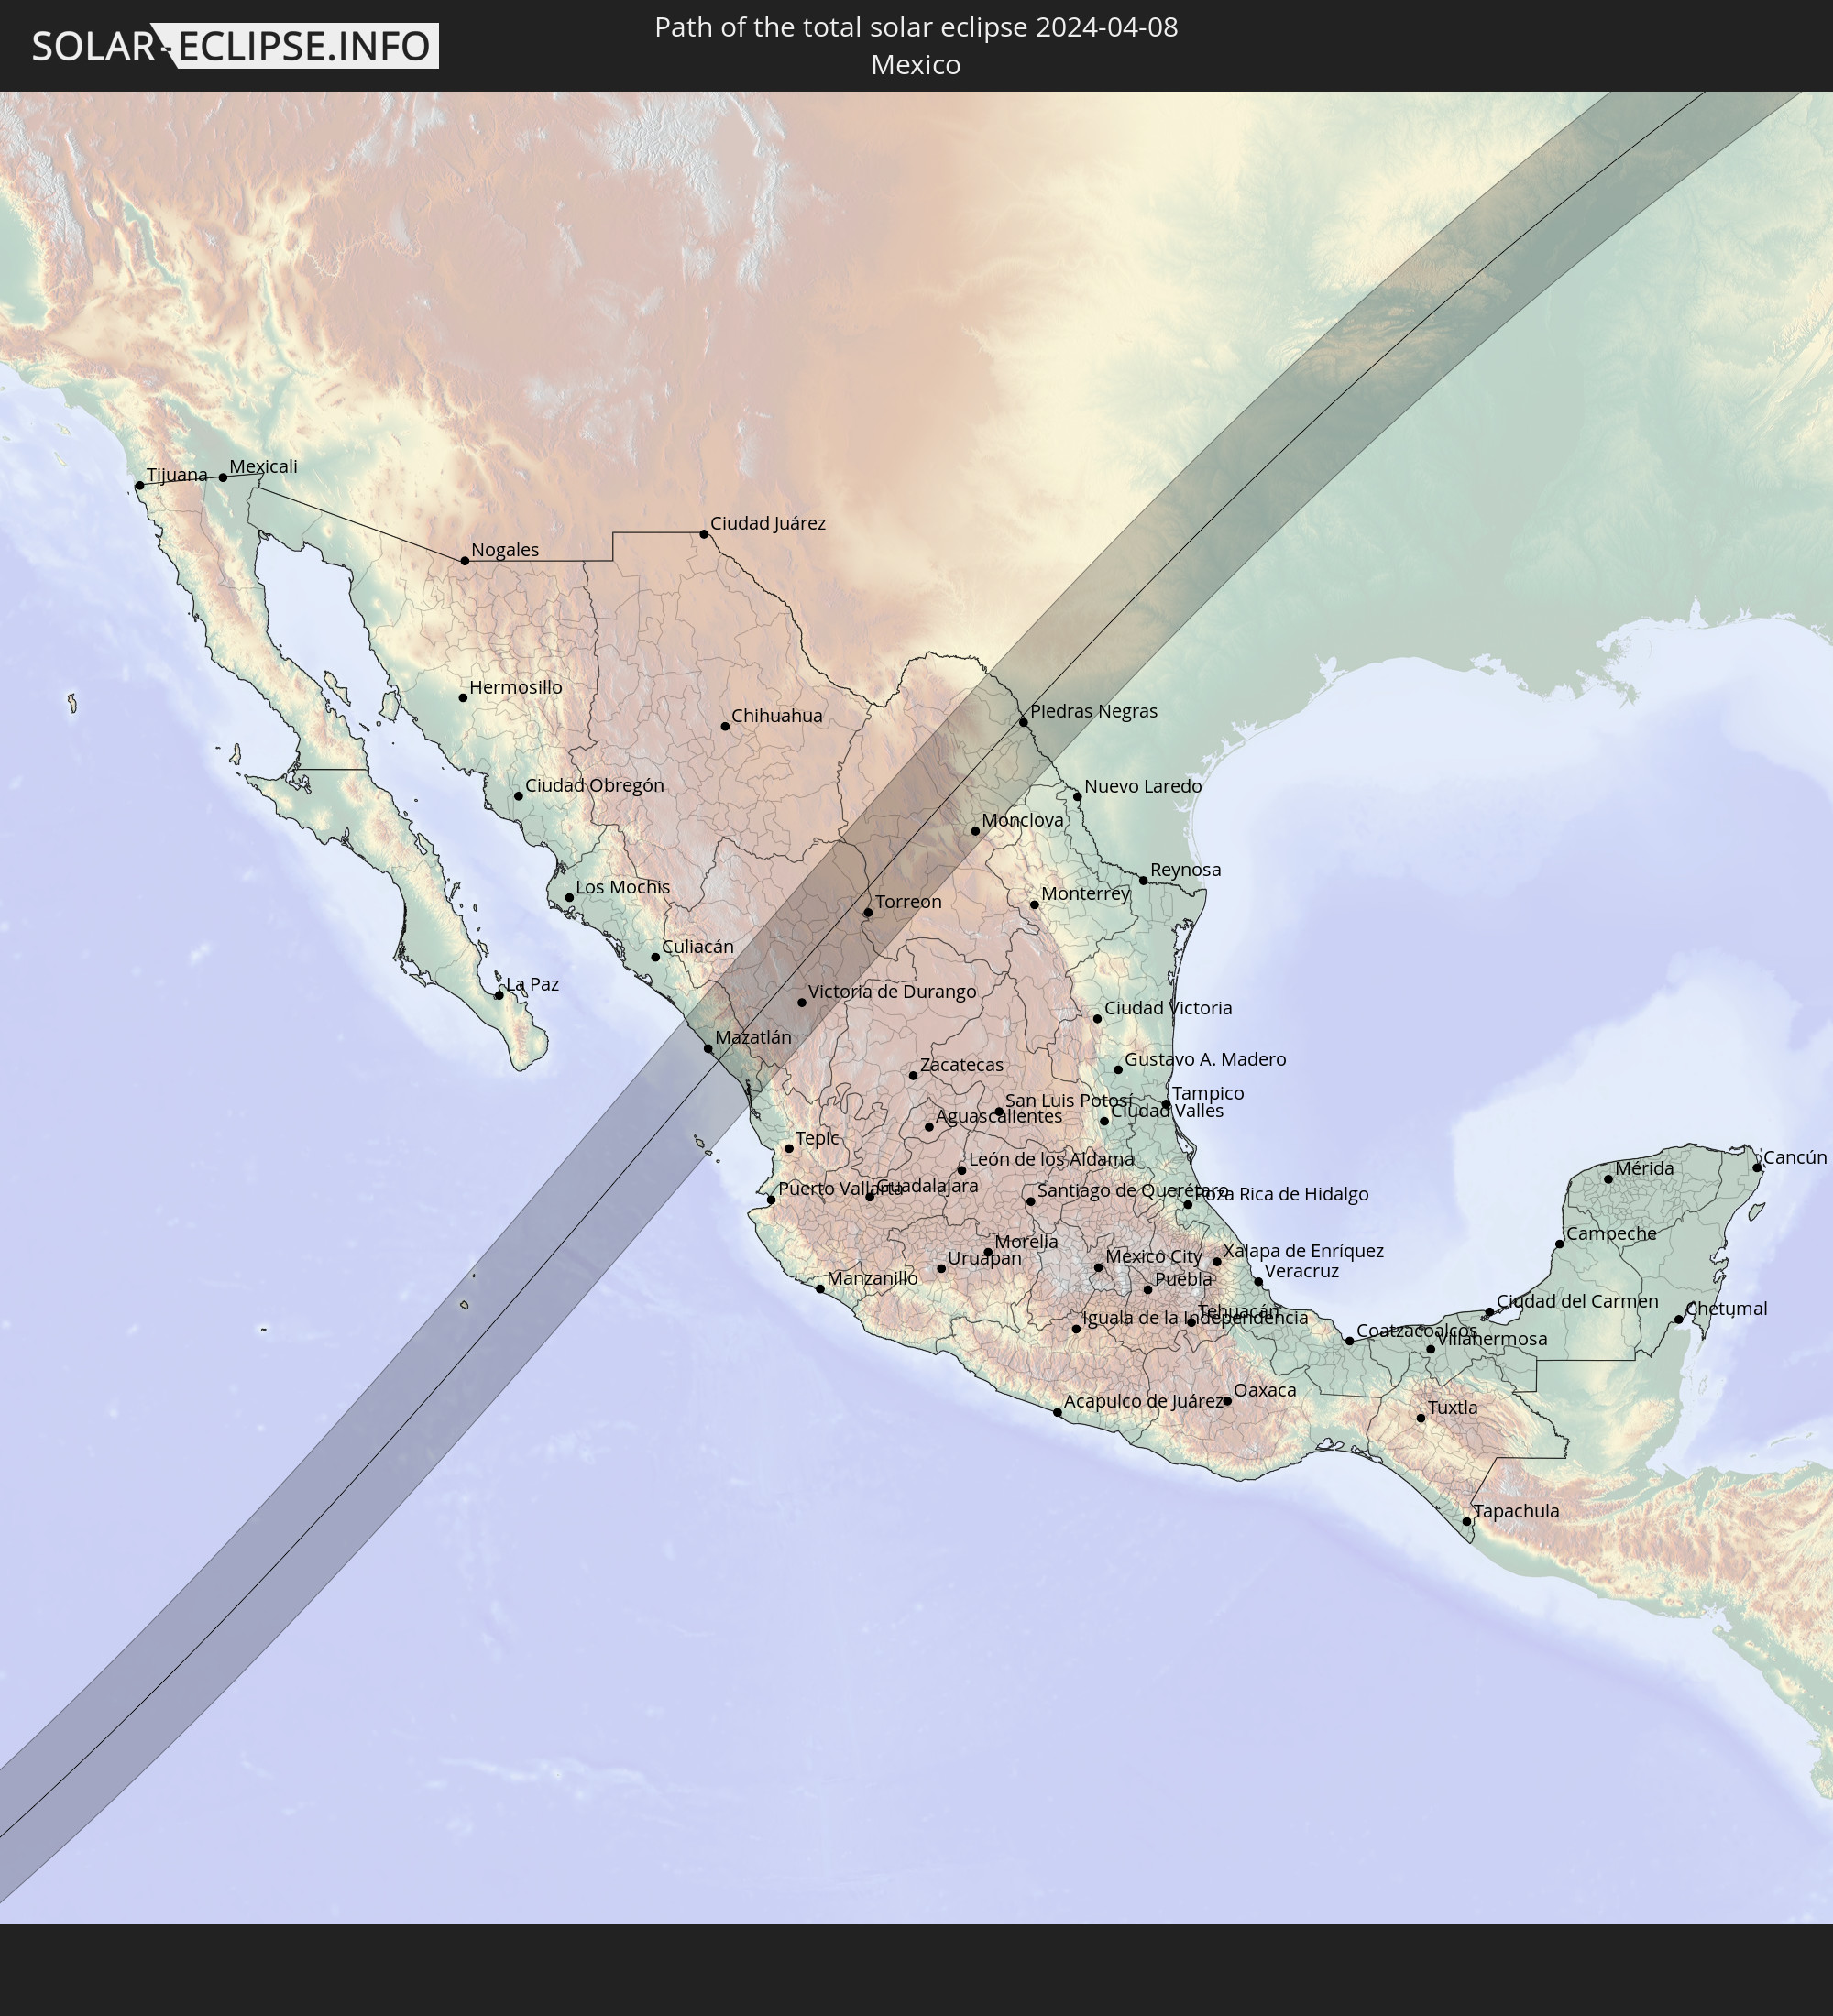 Solar Eclipse 2024 Path Of Totality Mexico Marne Beatrix